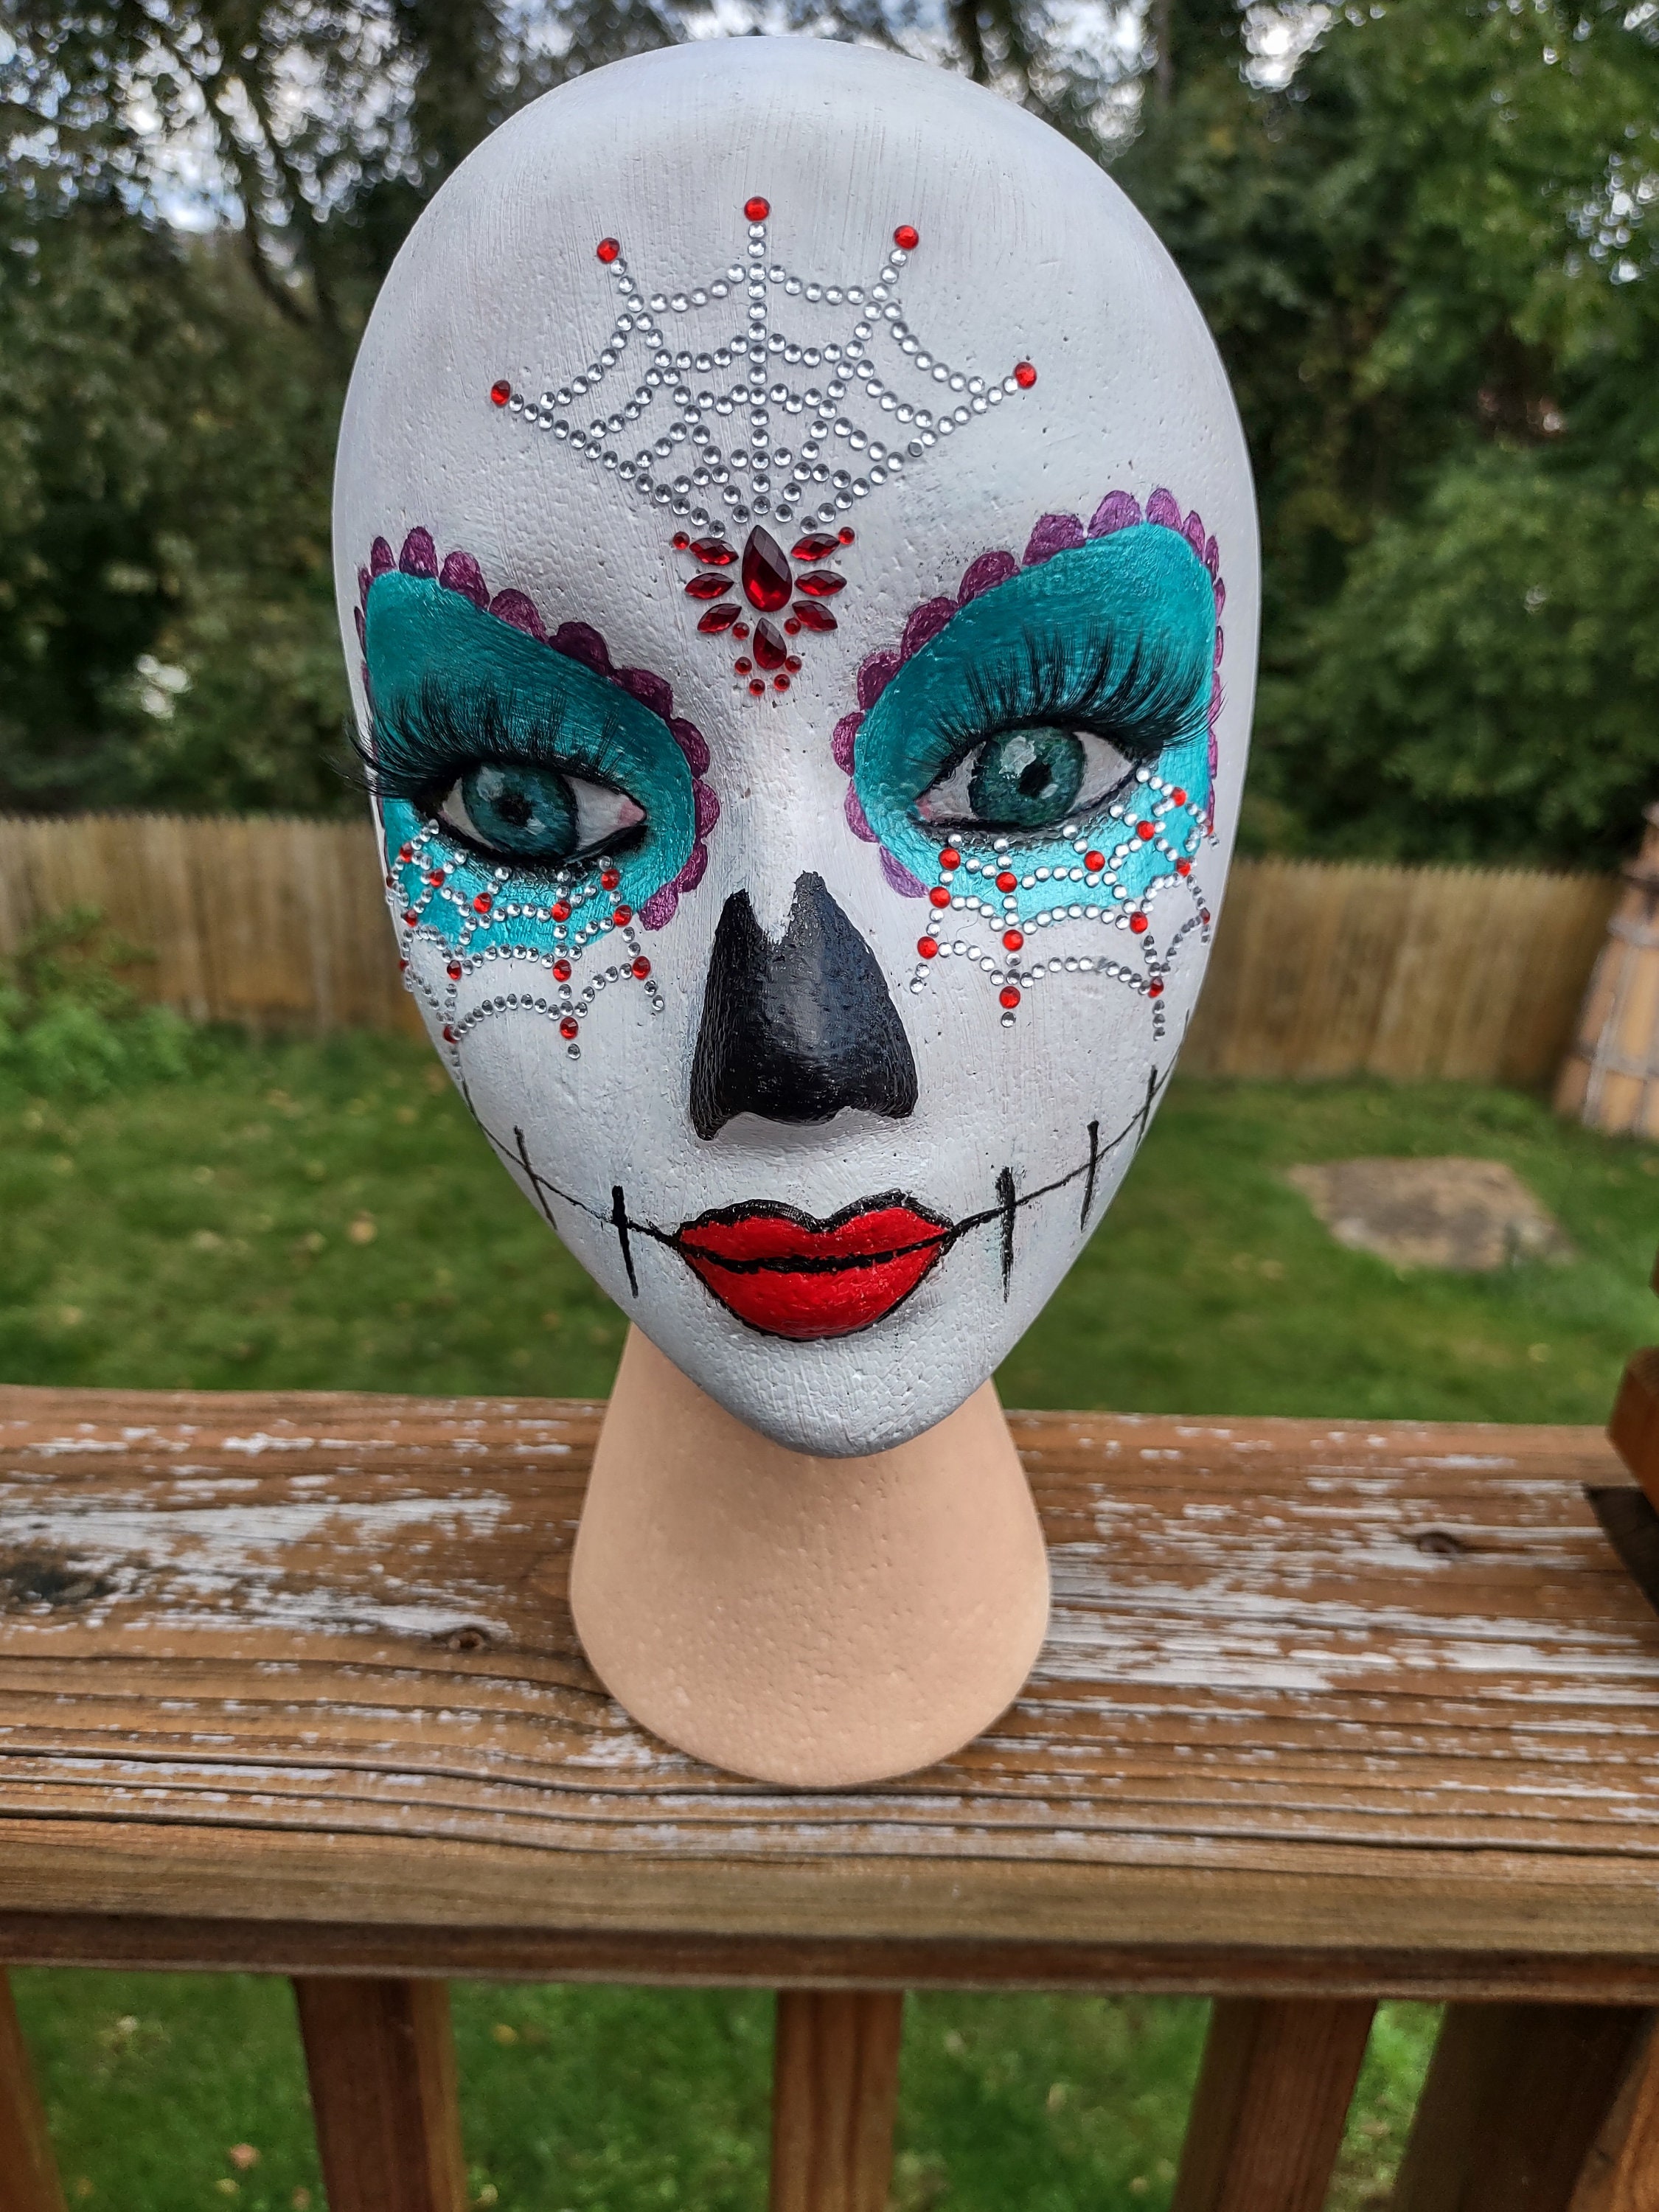 Styrofoam head mannequin markers, gold tacks acrylic painted